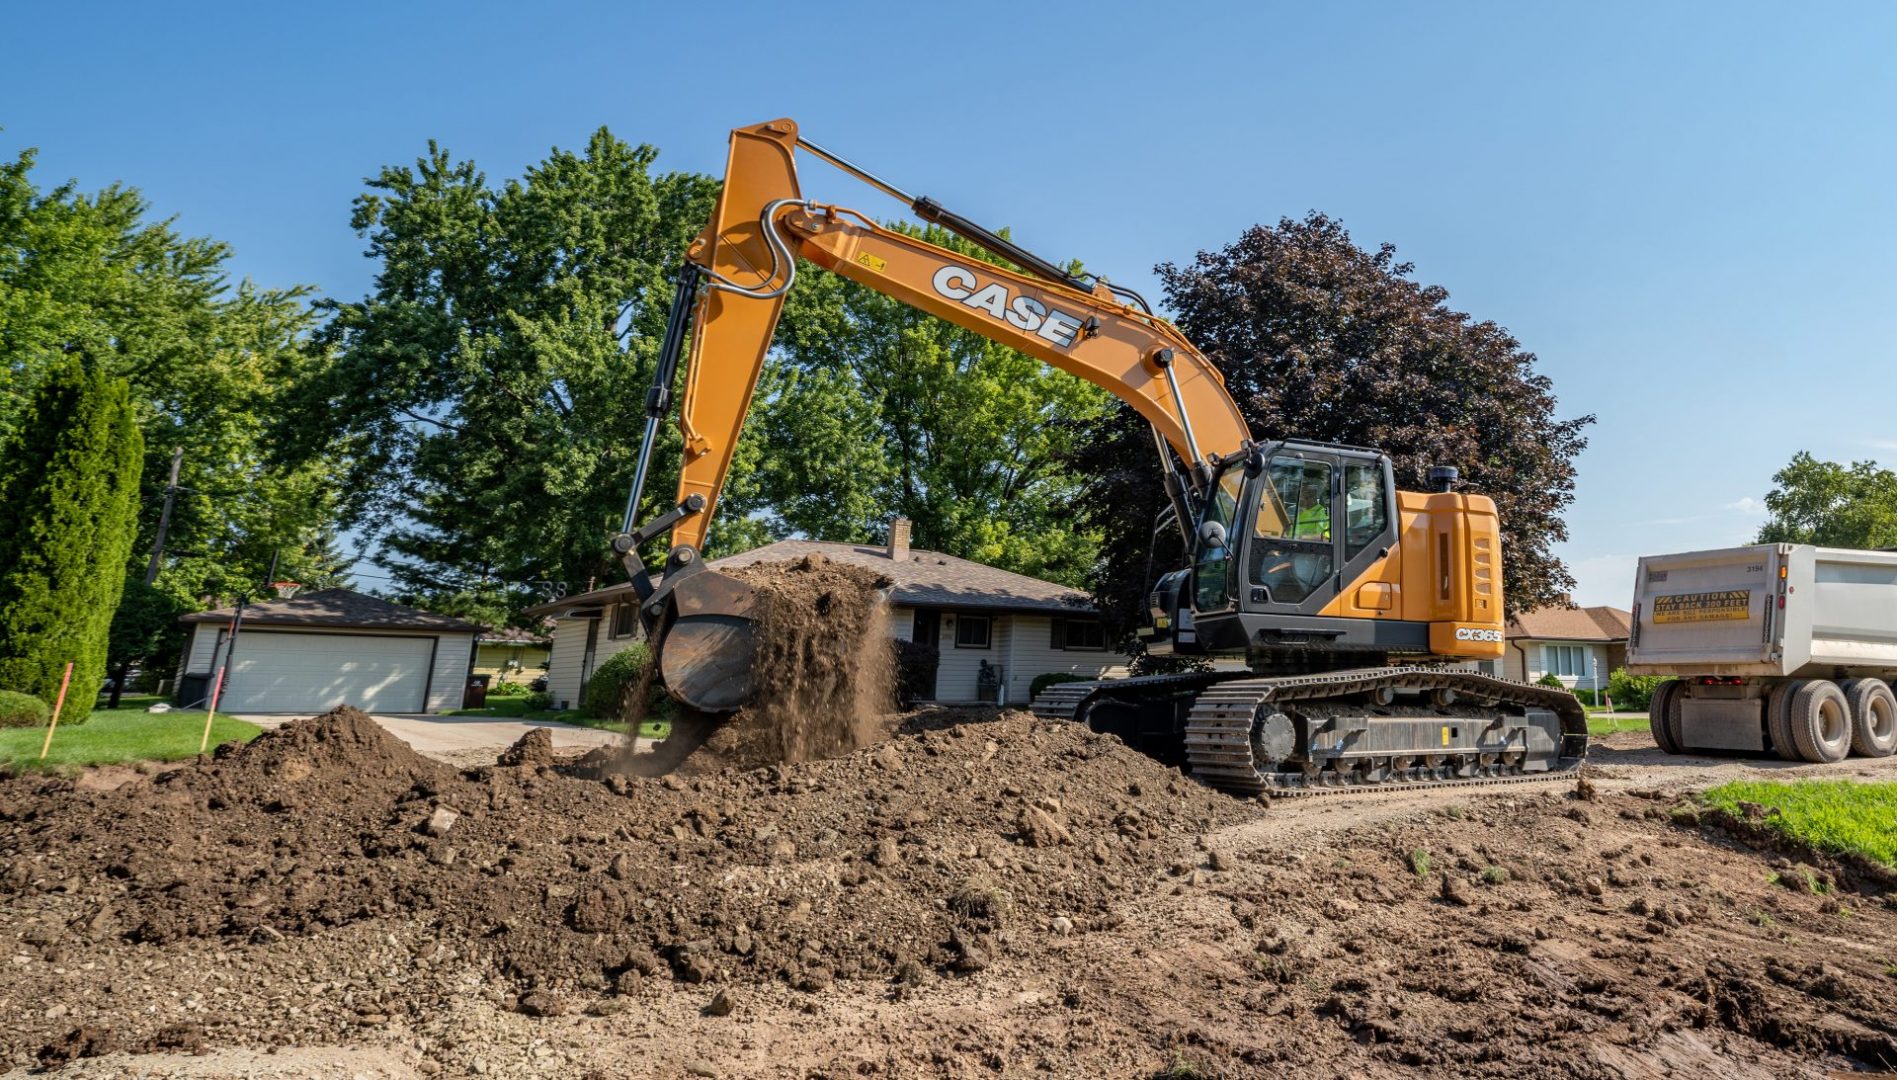 CASE introduces seven new excavators to its E Series